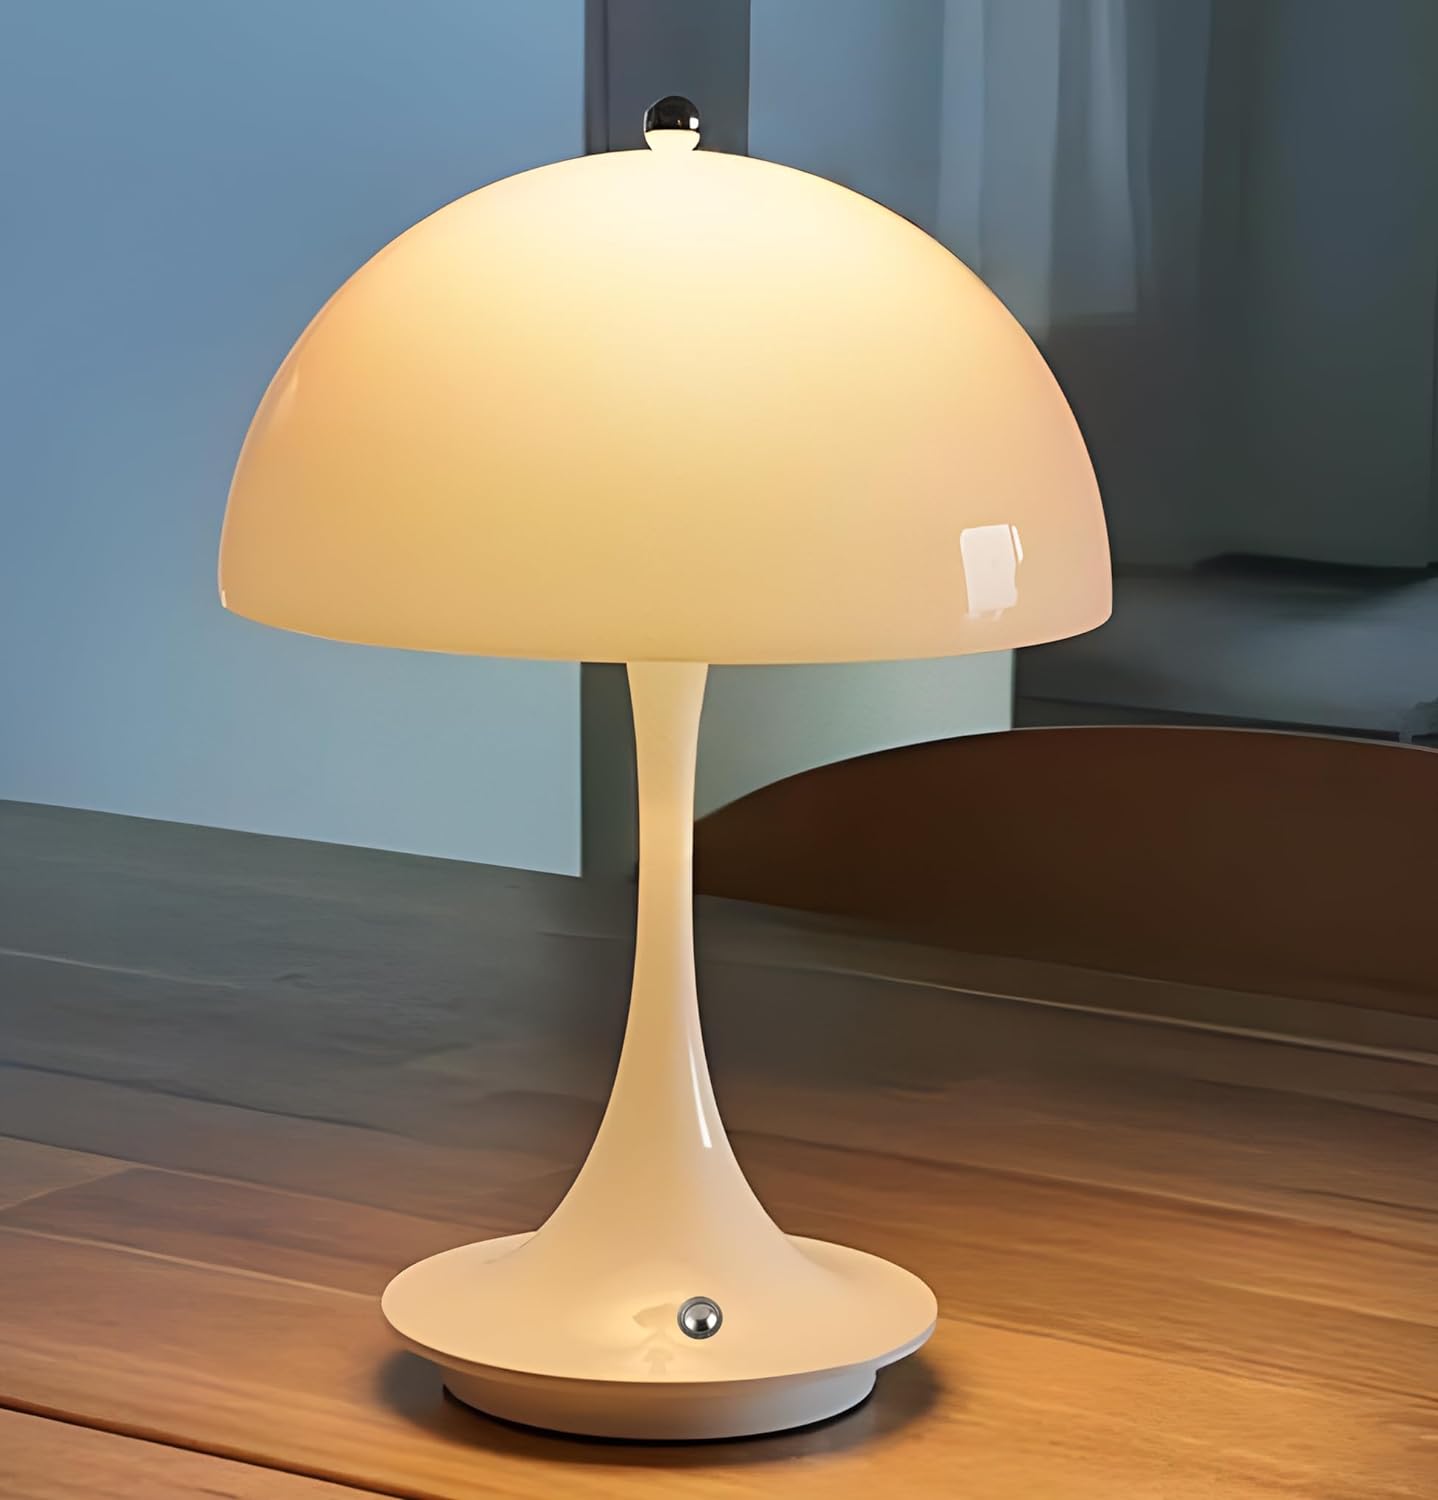 Cordless Mushroom Table Lamp with Touch Sensor, 3 Color Stepless Dimmable Portable Battery Operated Lights for Bedroom Decor/Restaurant/Outside/Camping (White)